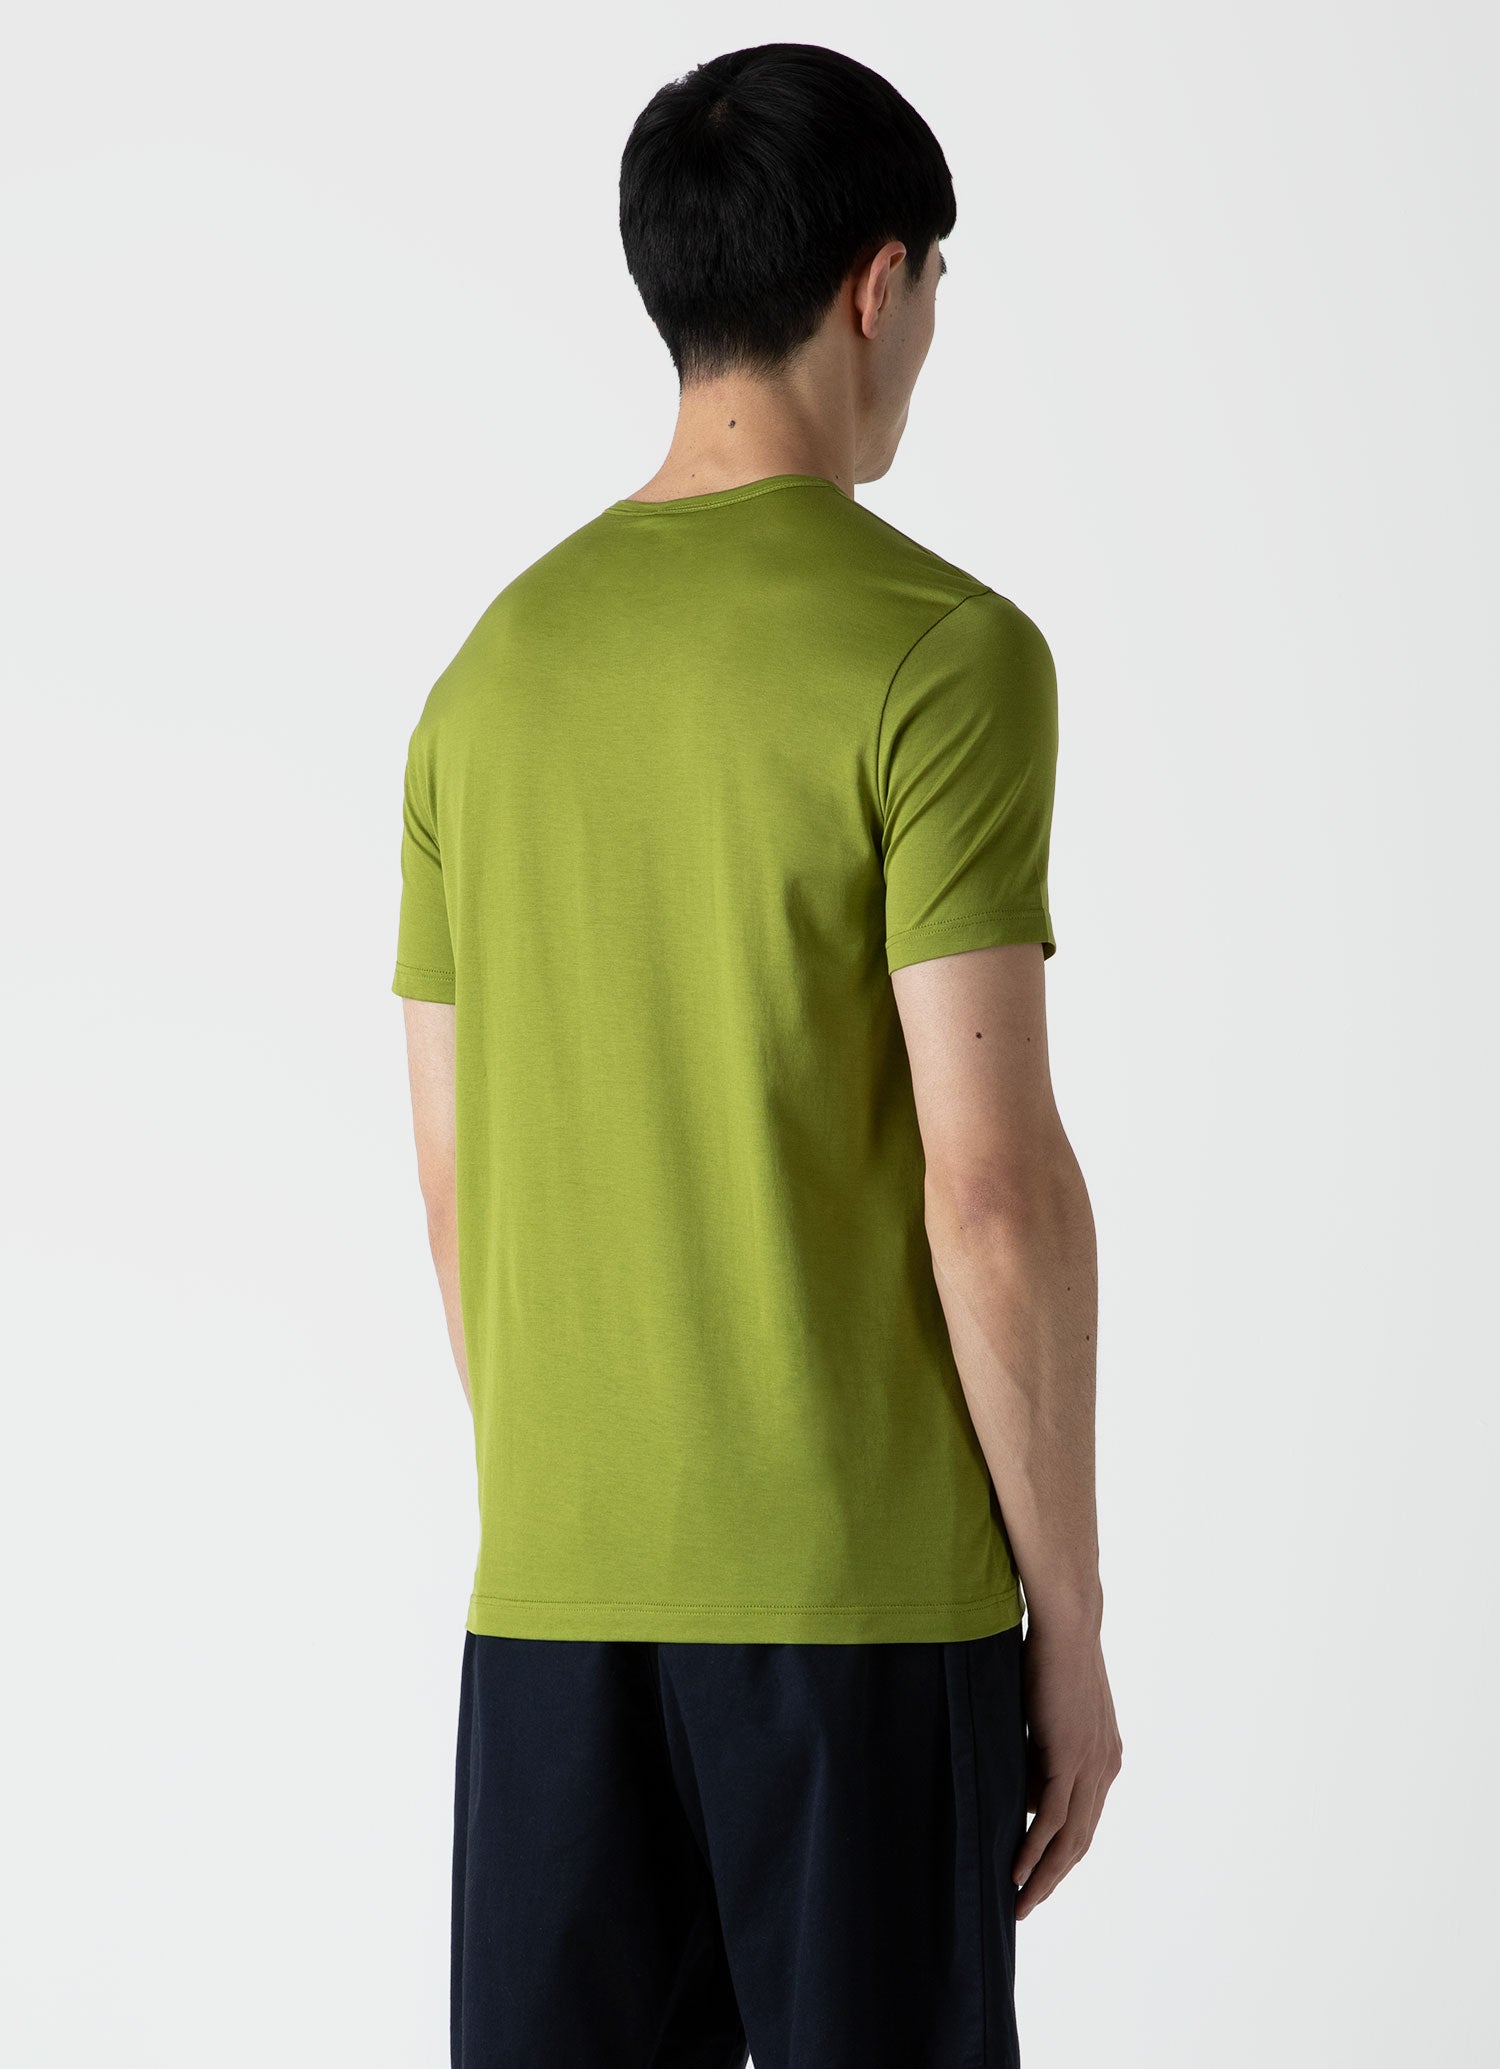 Men's Classic T-shirt in Country Green